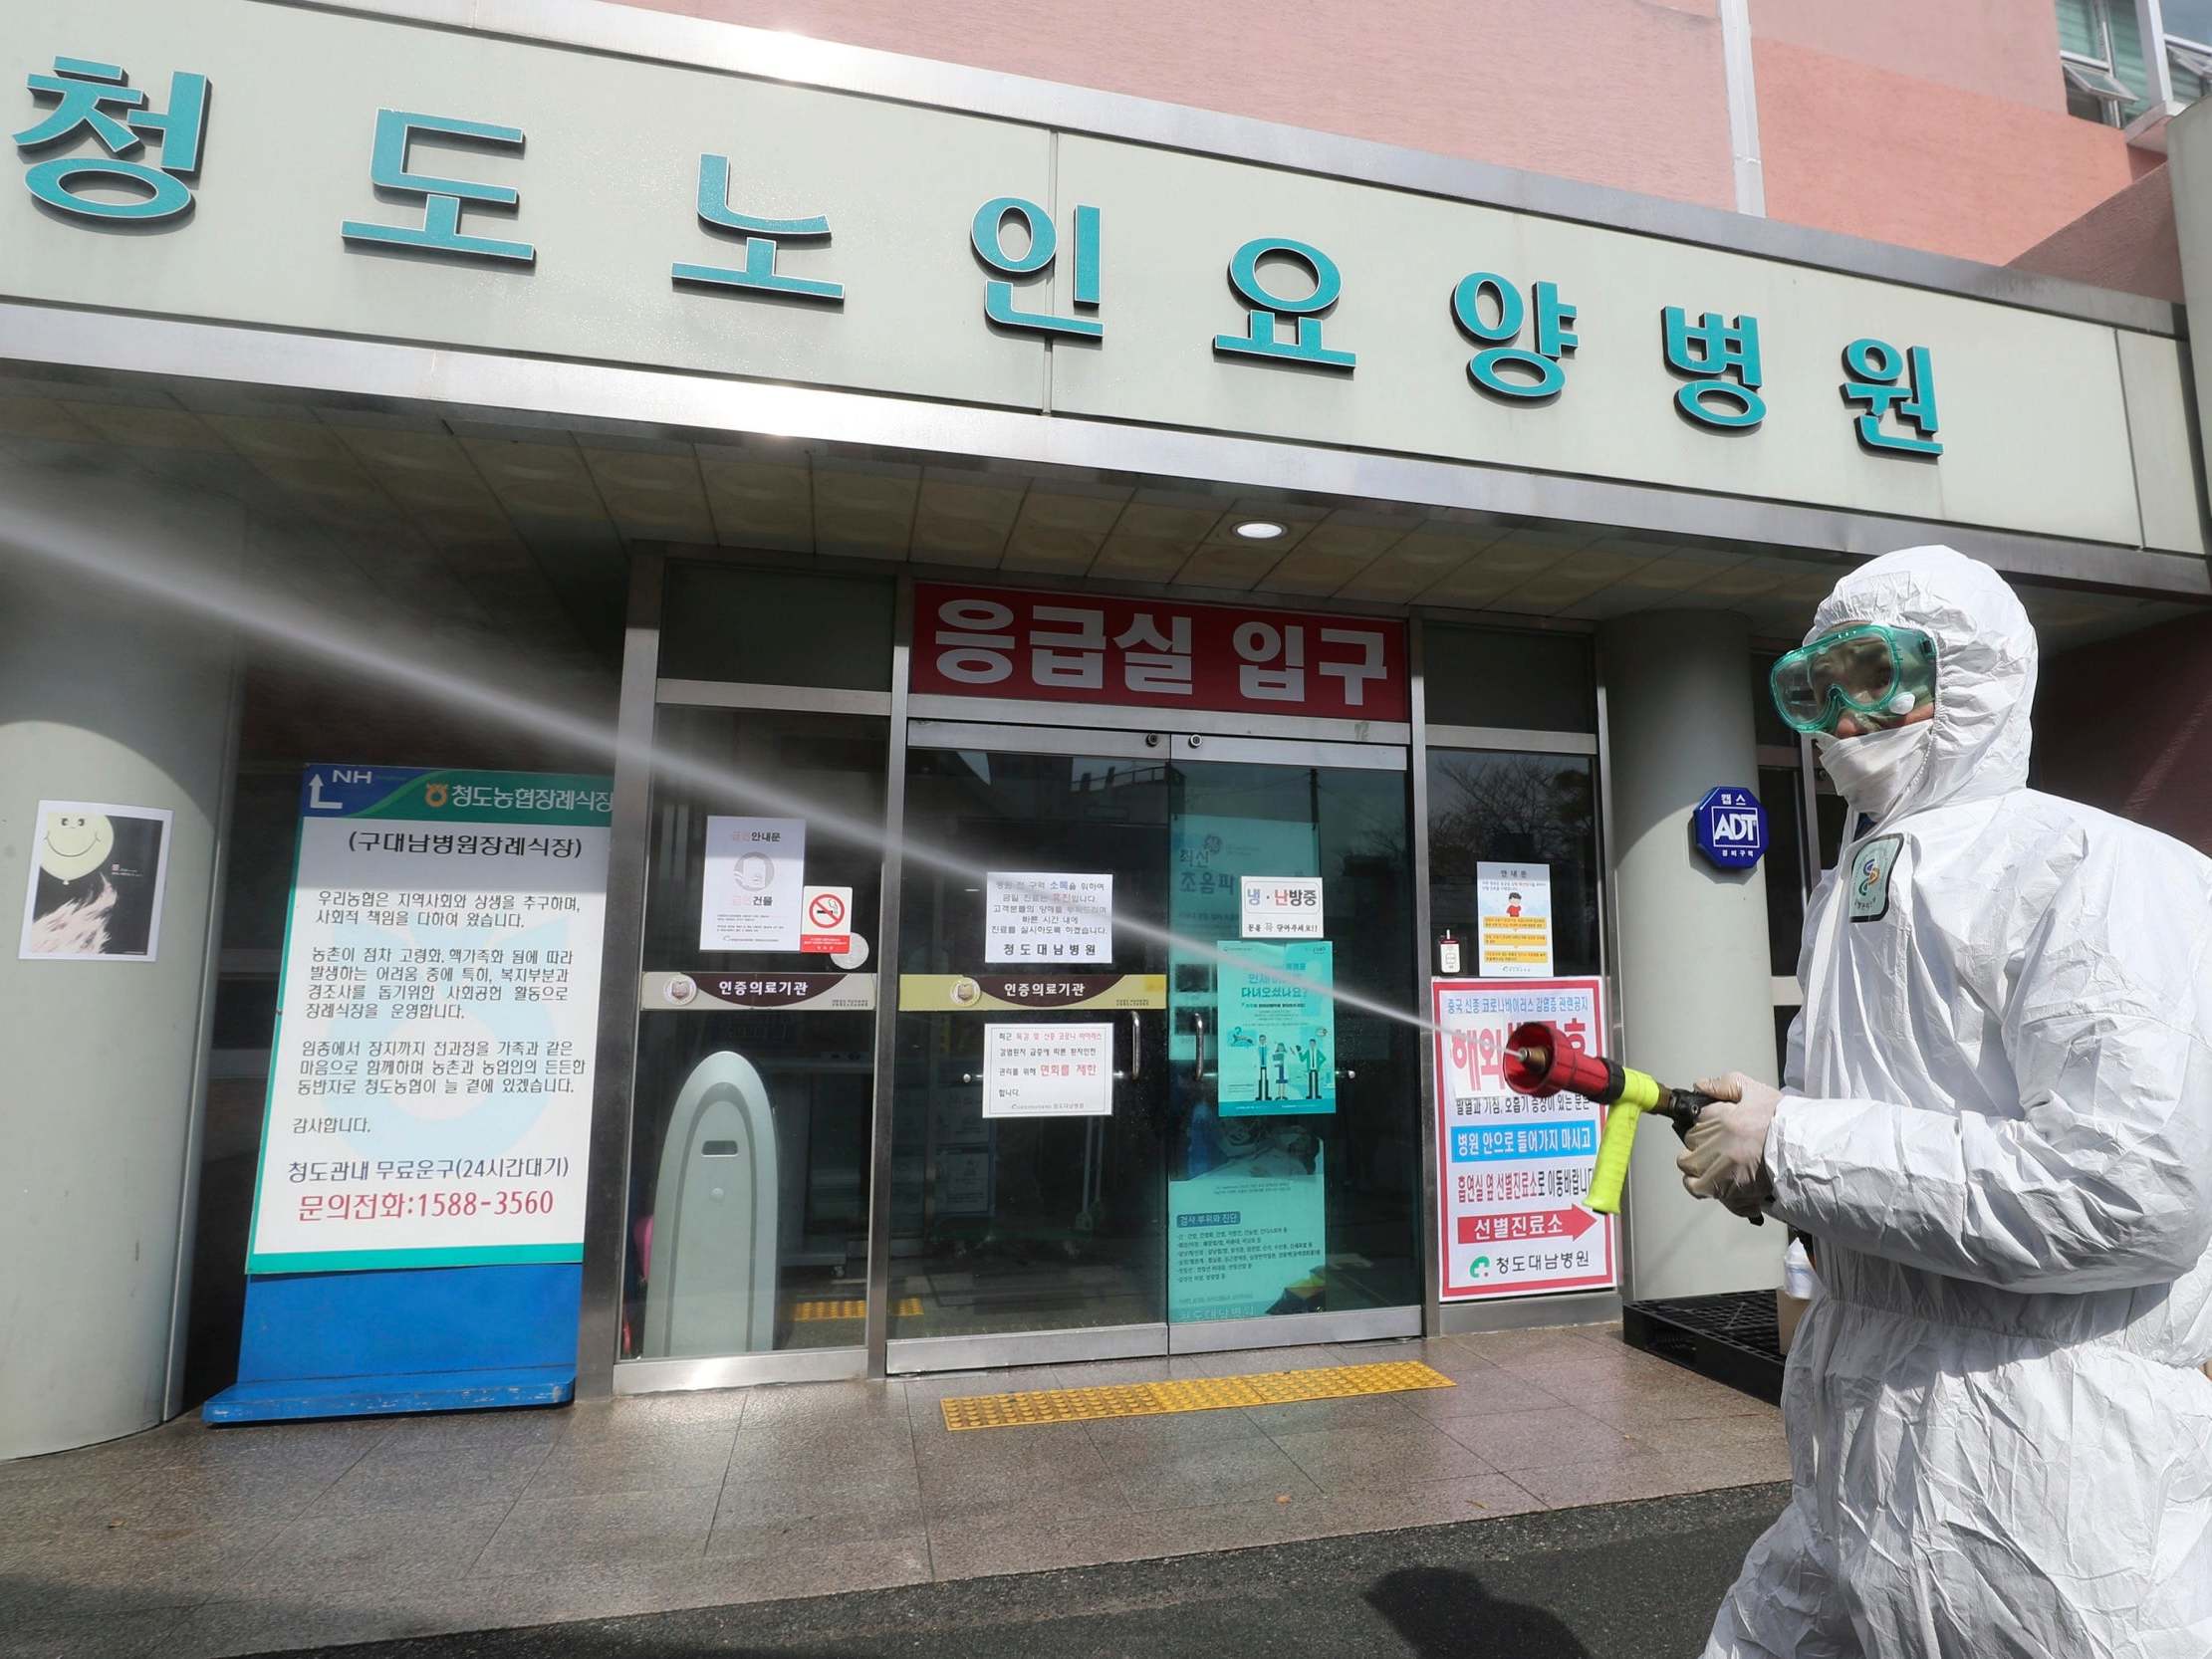 A worker wearing protective gears sprays disinfectant against the new coronavirus in front of the Daenam Hospital in Cheongdo, South Korea